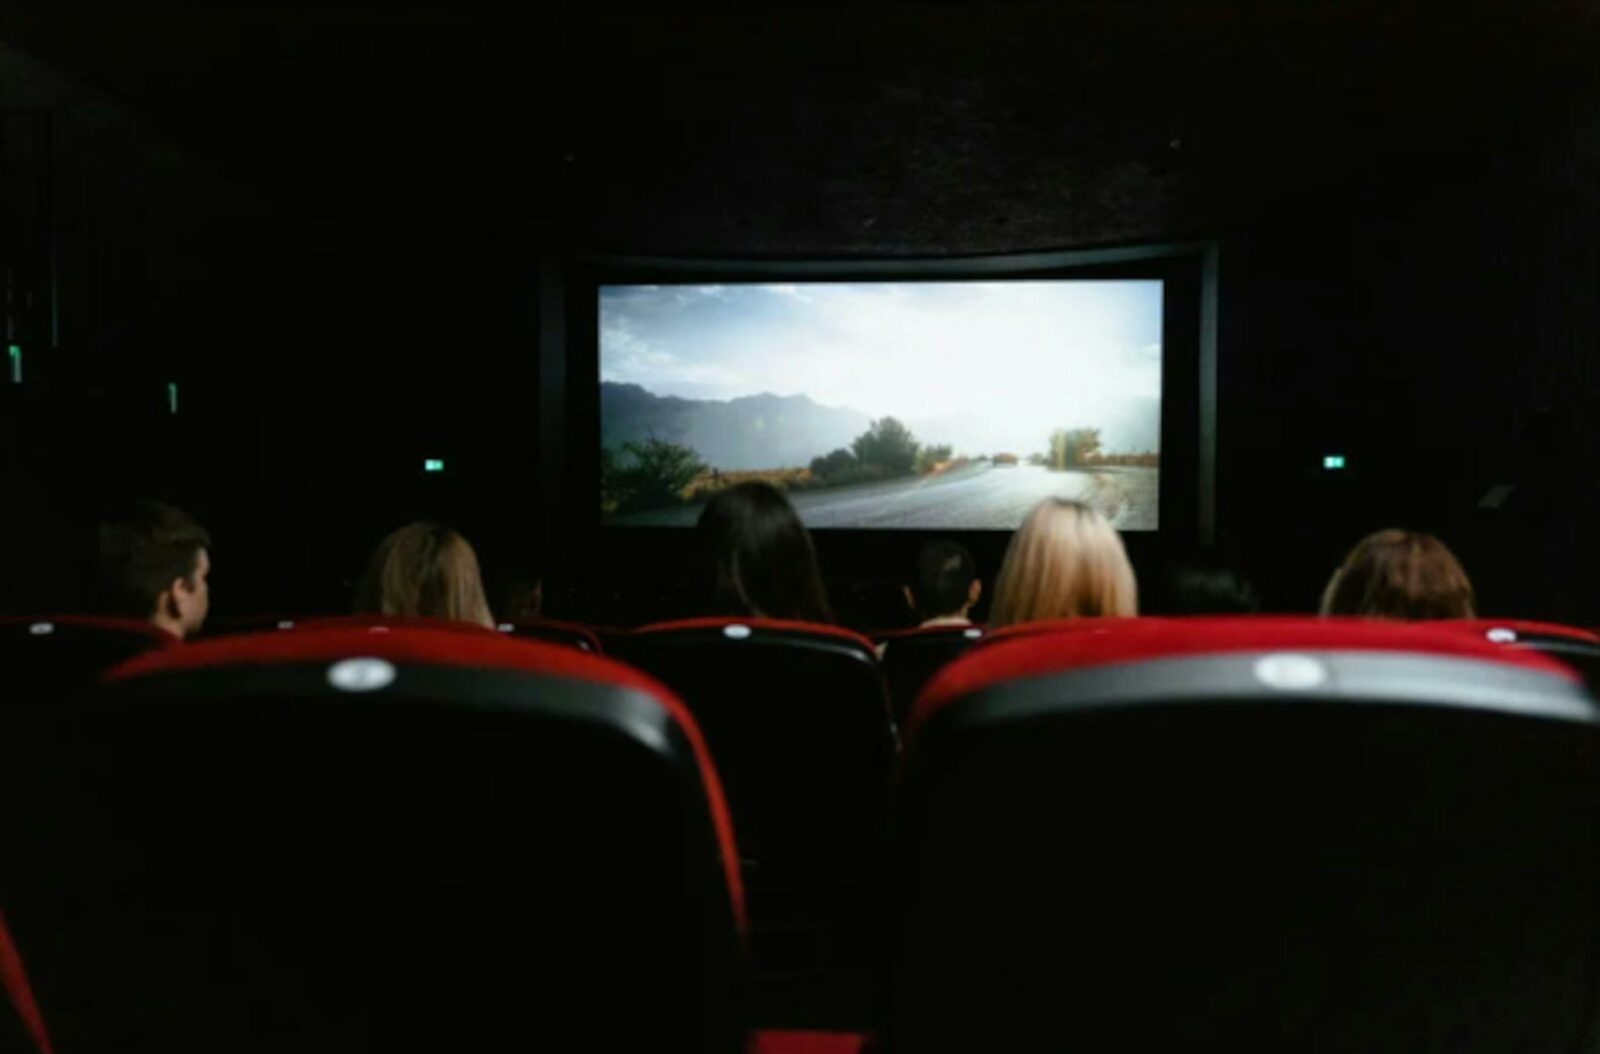 People watching a movie